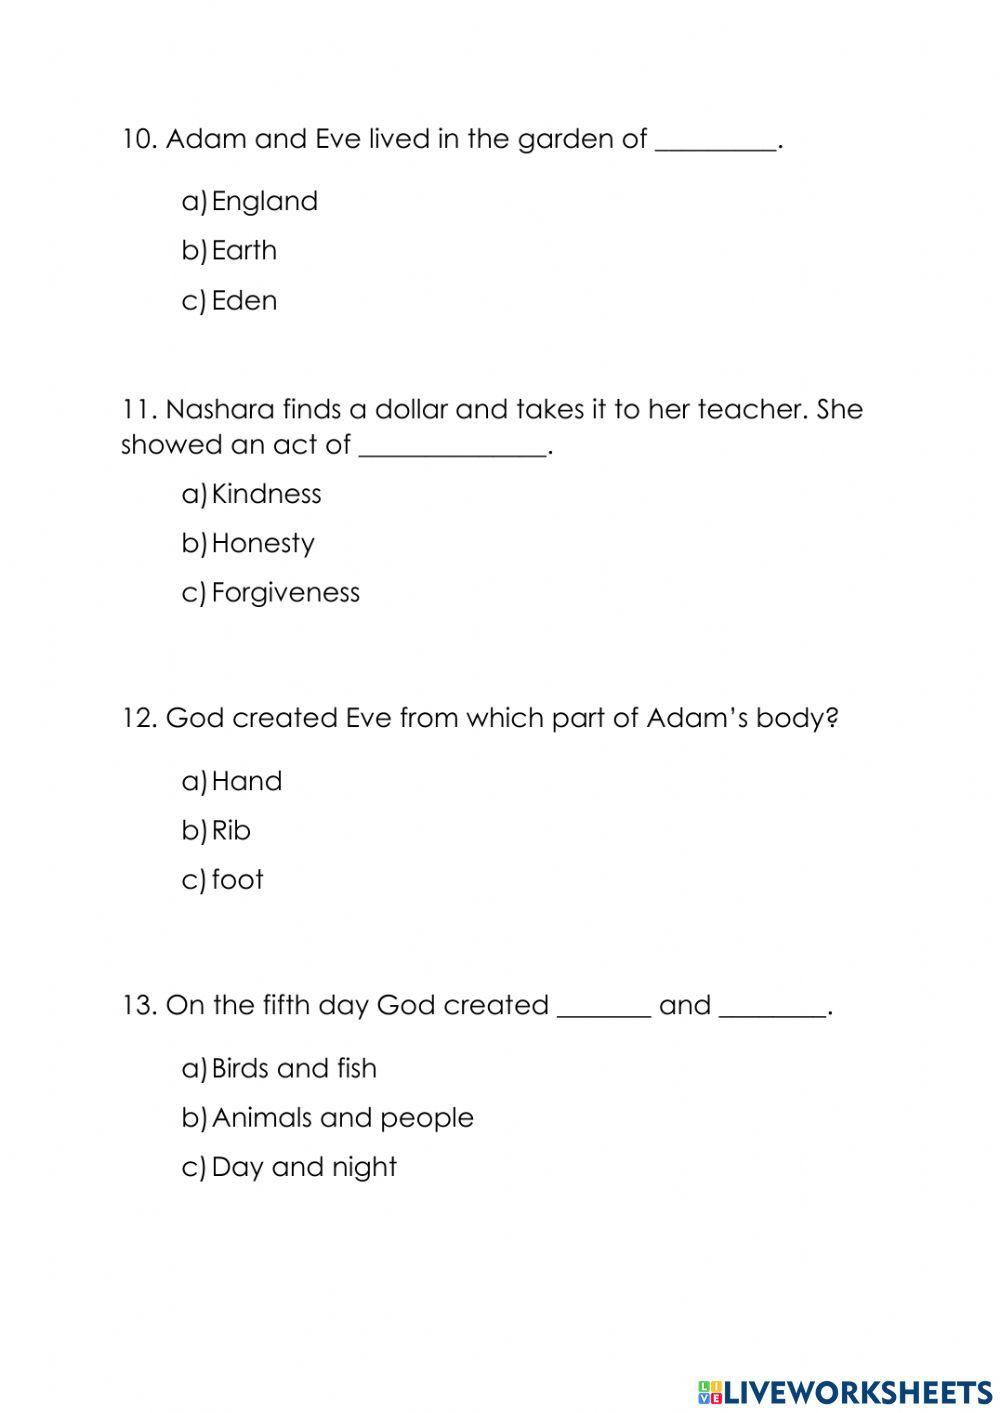 Moral and Religious Education test